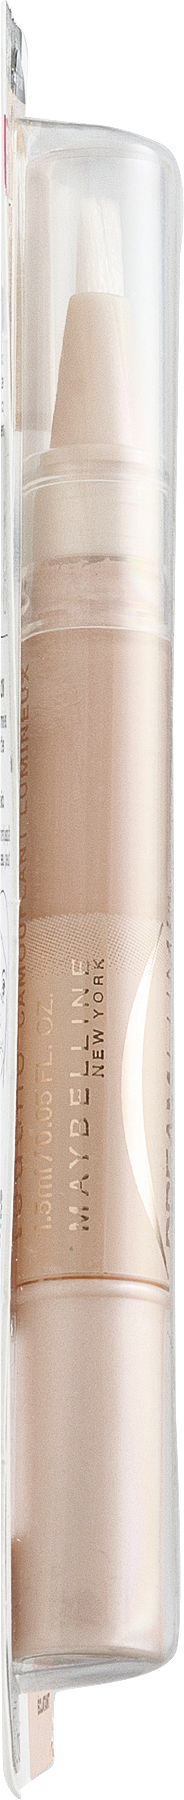 Maybelline New York Dream Lumi Touch Highlighting Concealer, Radiant - image 3 of 9